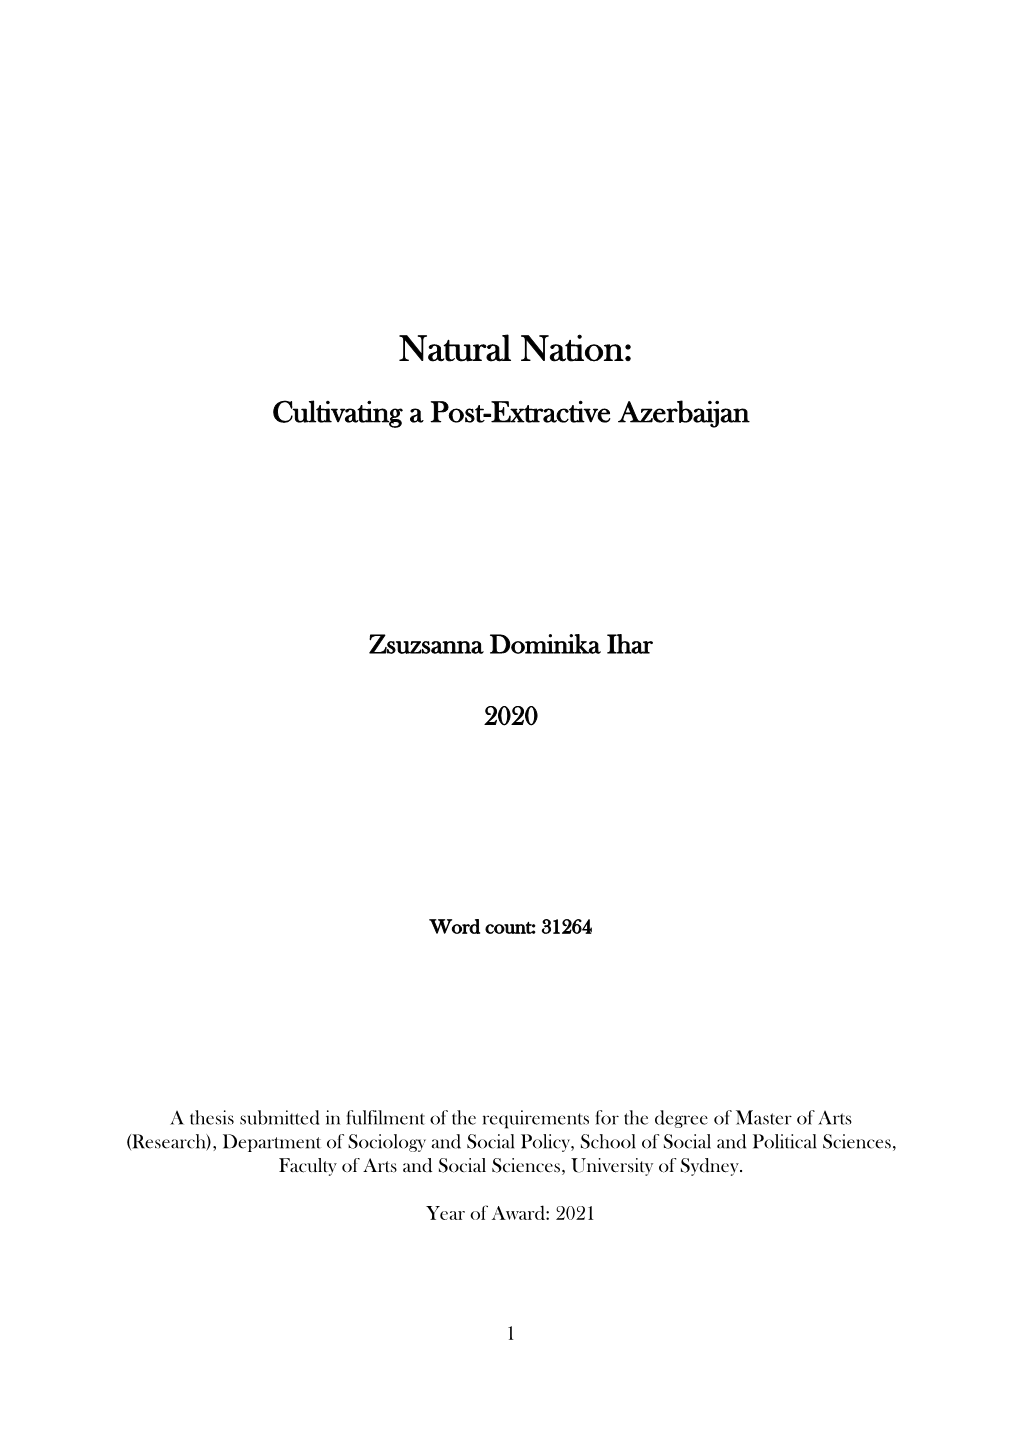 Natural Nation: Cultivating a Post-Extractive Azerbaijan